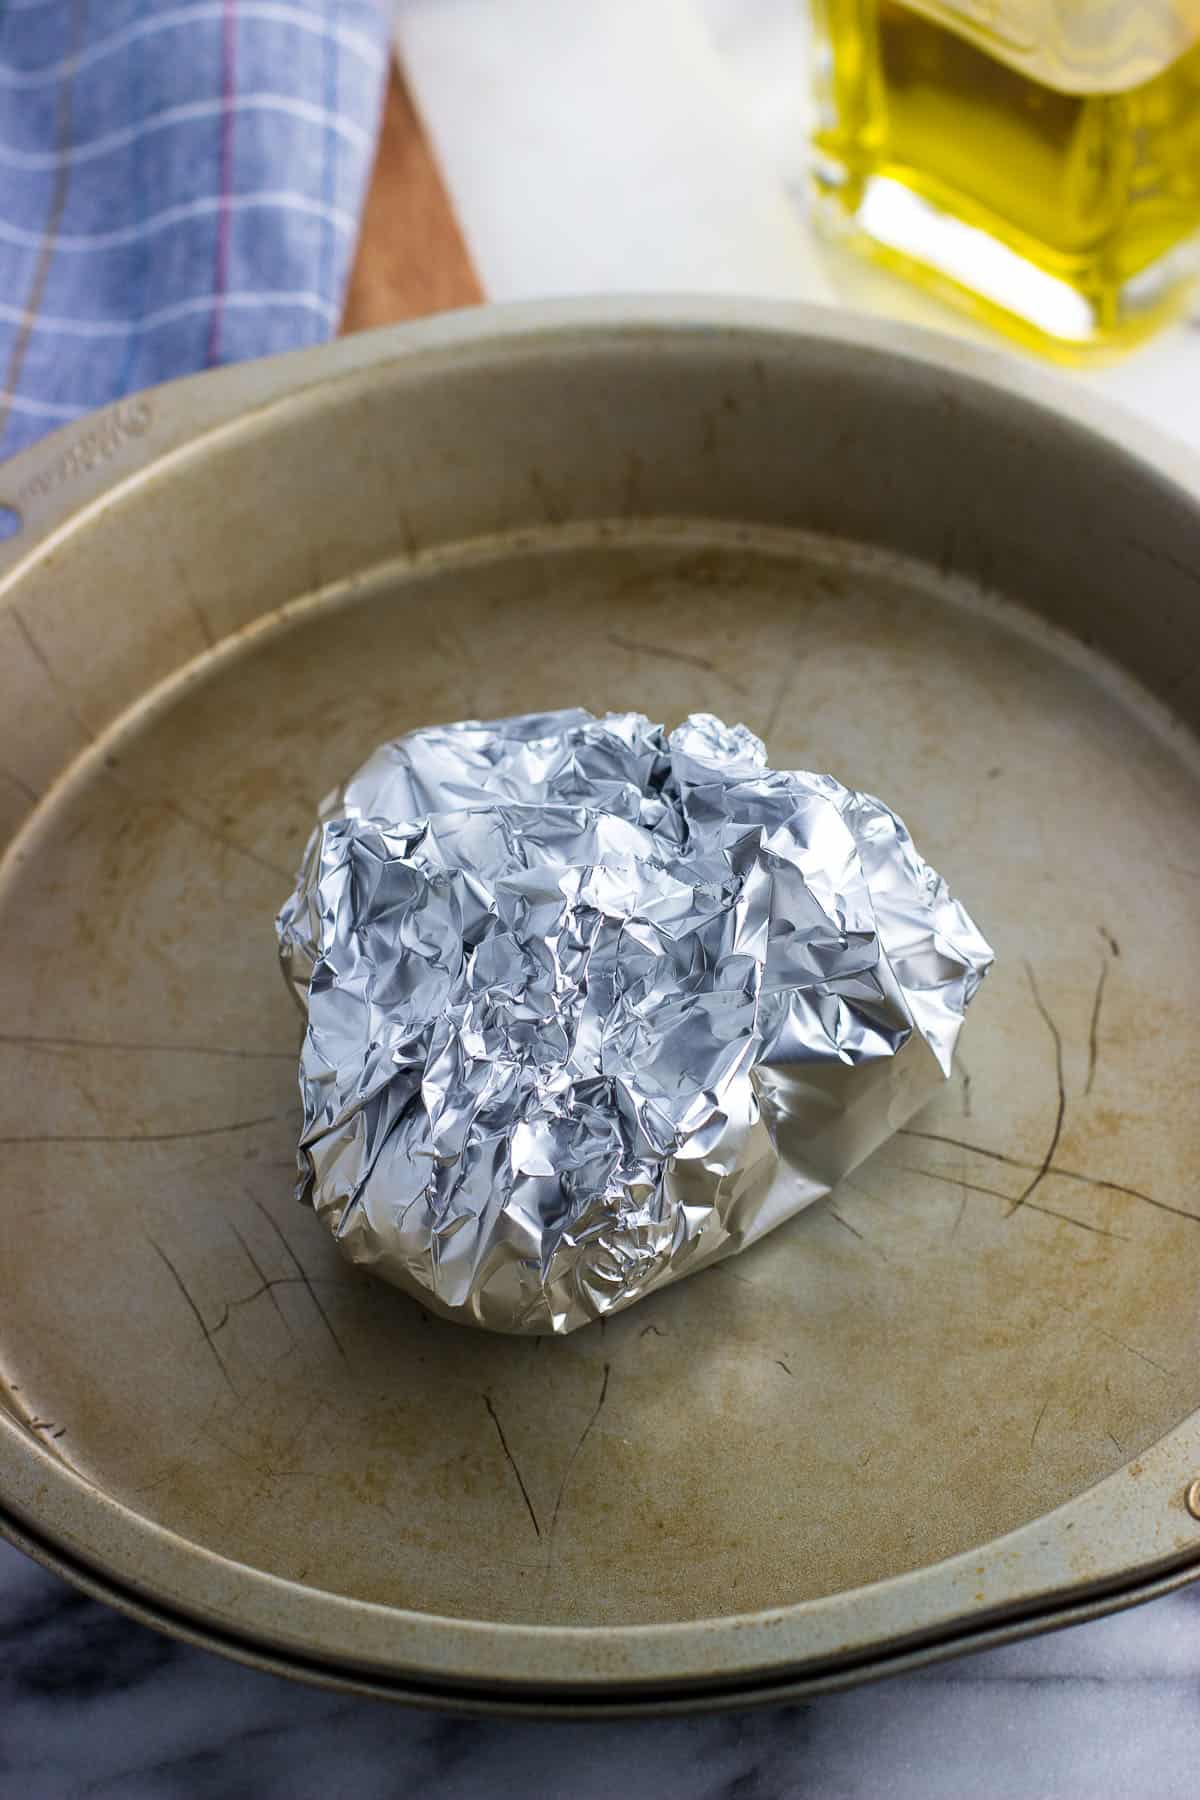 A foil-wrapped package of garlic heads on a pan.